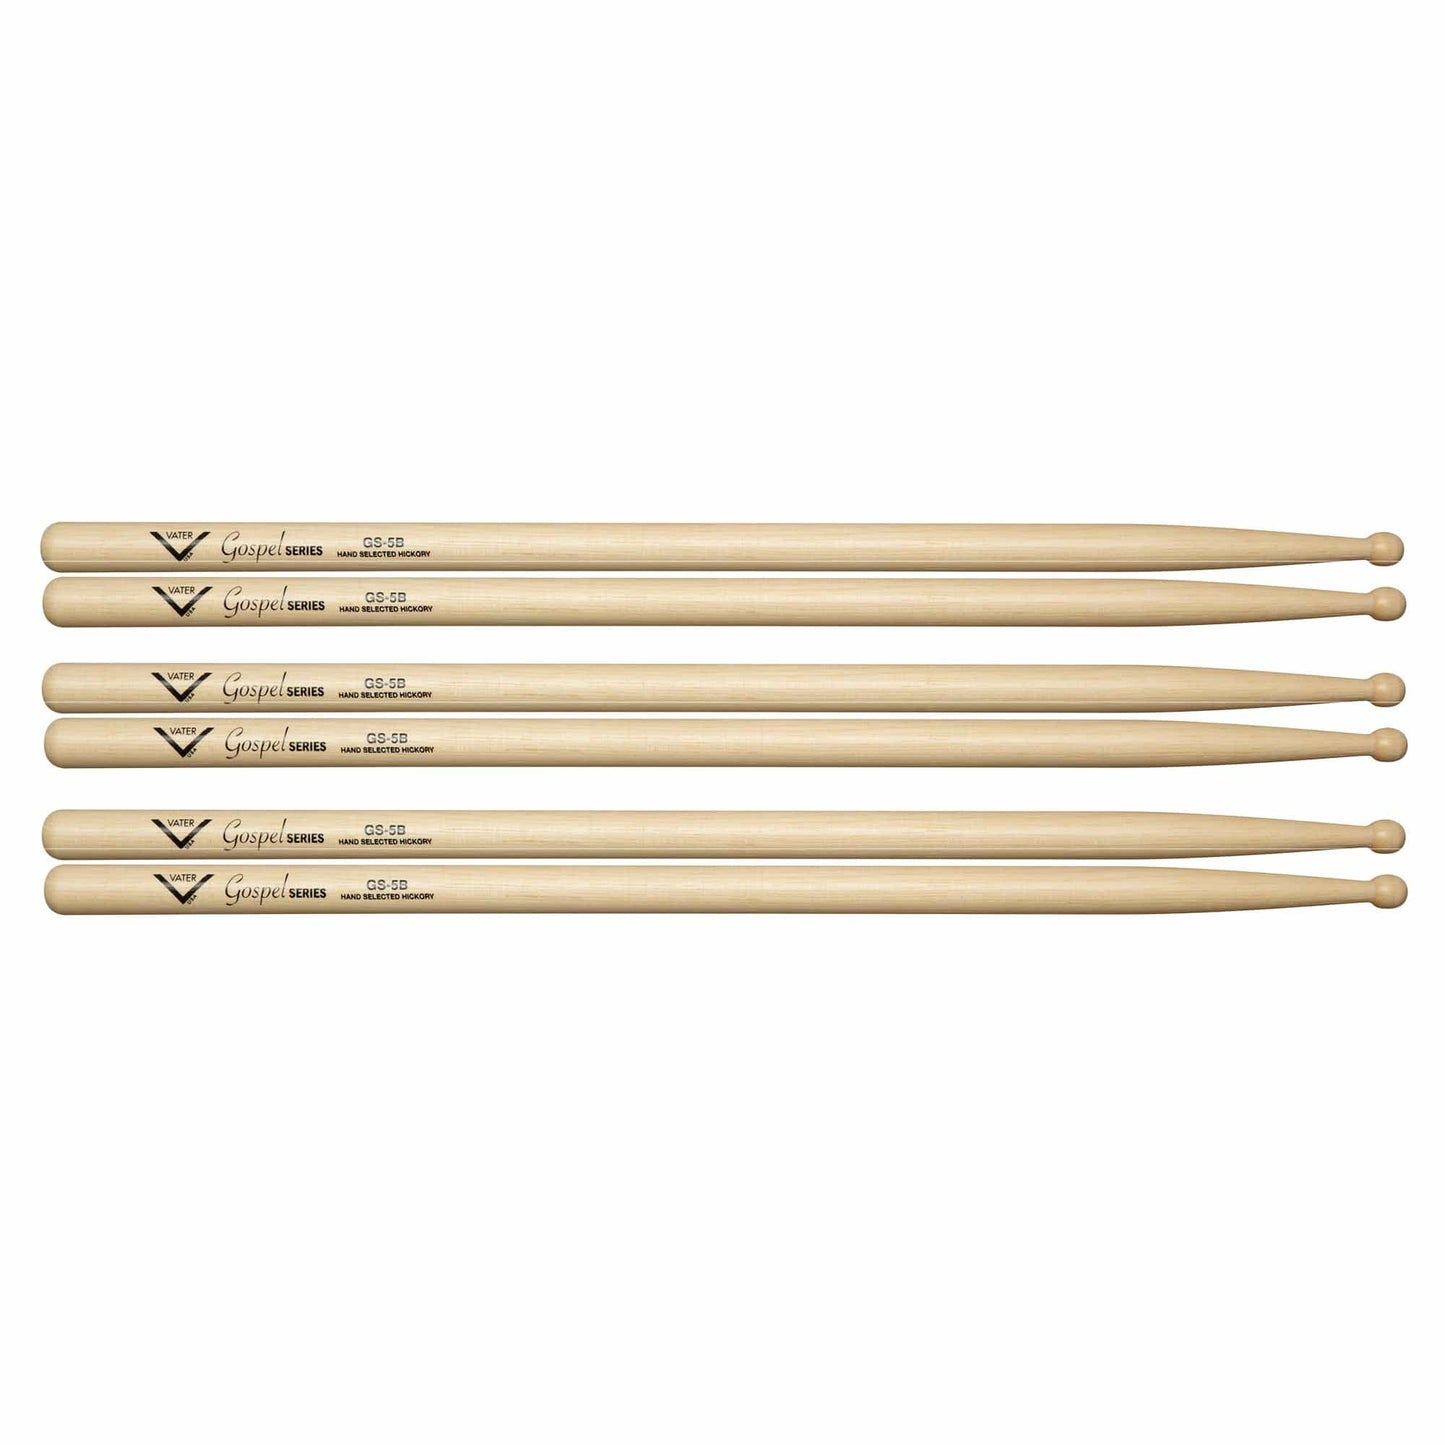 Vater Gospel 5B Wood Tip Drum Sticks (3 Pair Bundle) Drums and Percussion / Parts and Accessories / Drum Sticks and Mallets